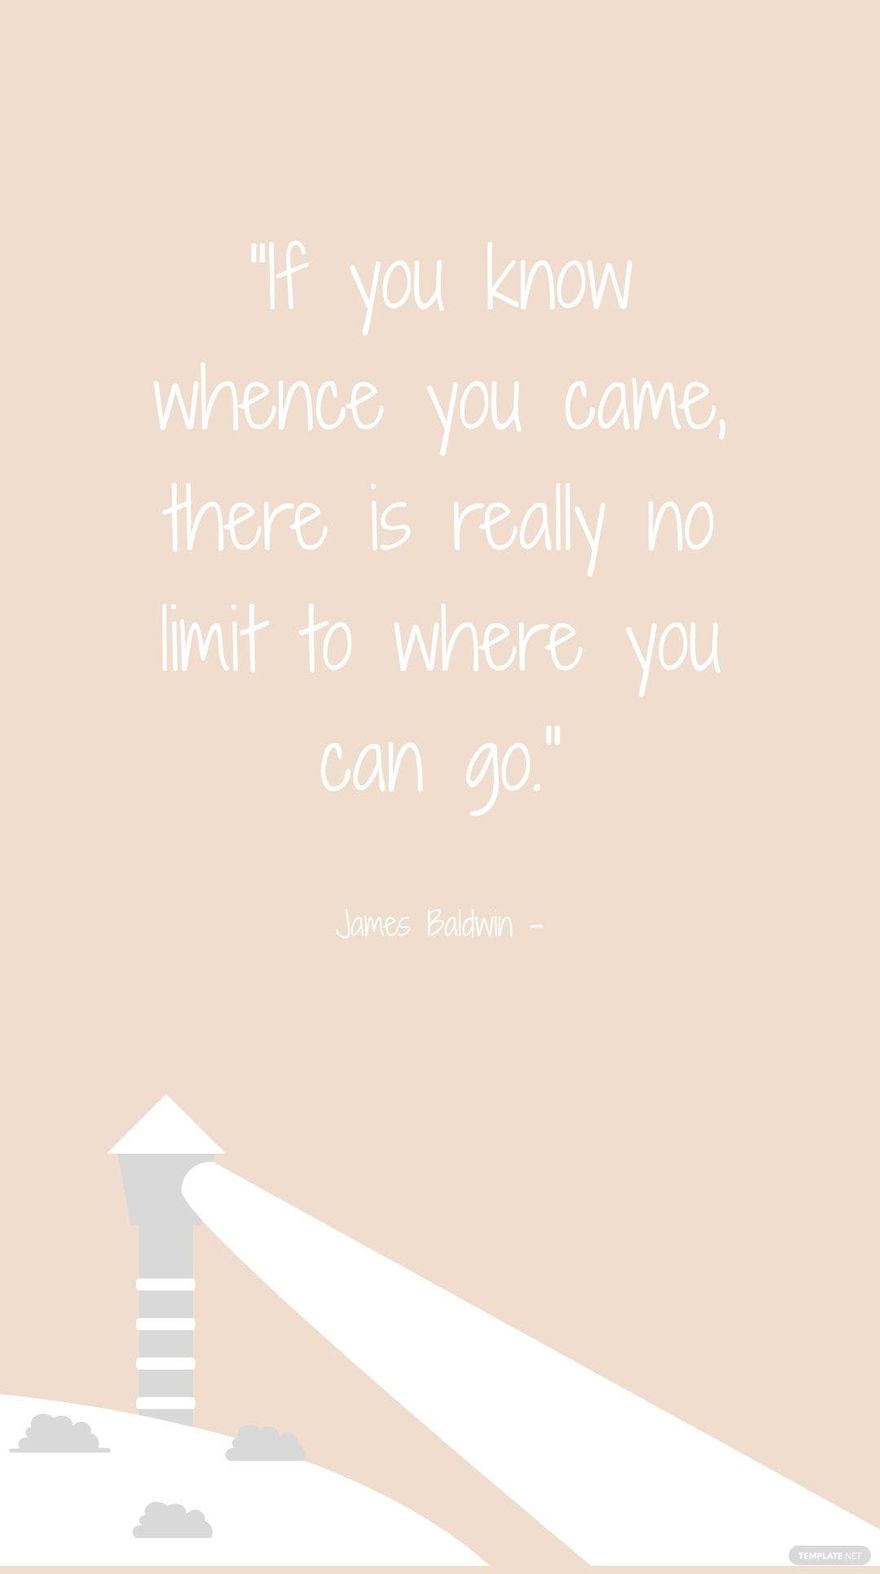 James Baldwin - If you know whence you came, there is really no limit to where you can go.